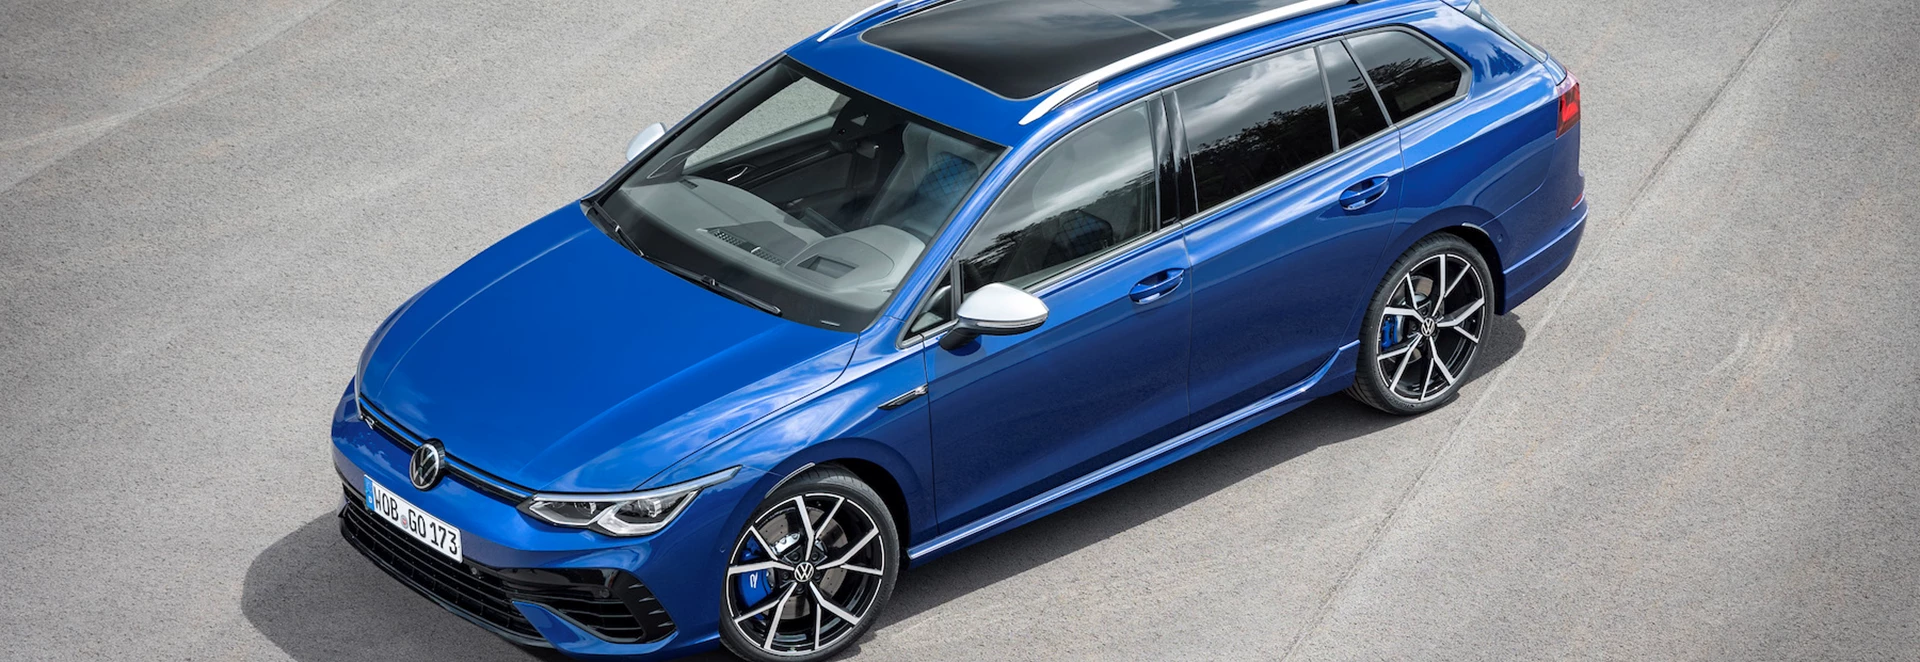 New 2021 Volkswagen Golf R unveiled as hot 316bhp wagon 